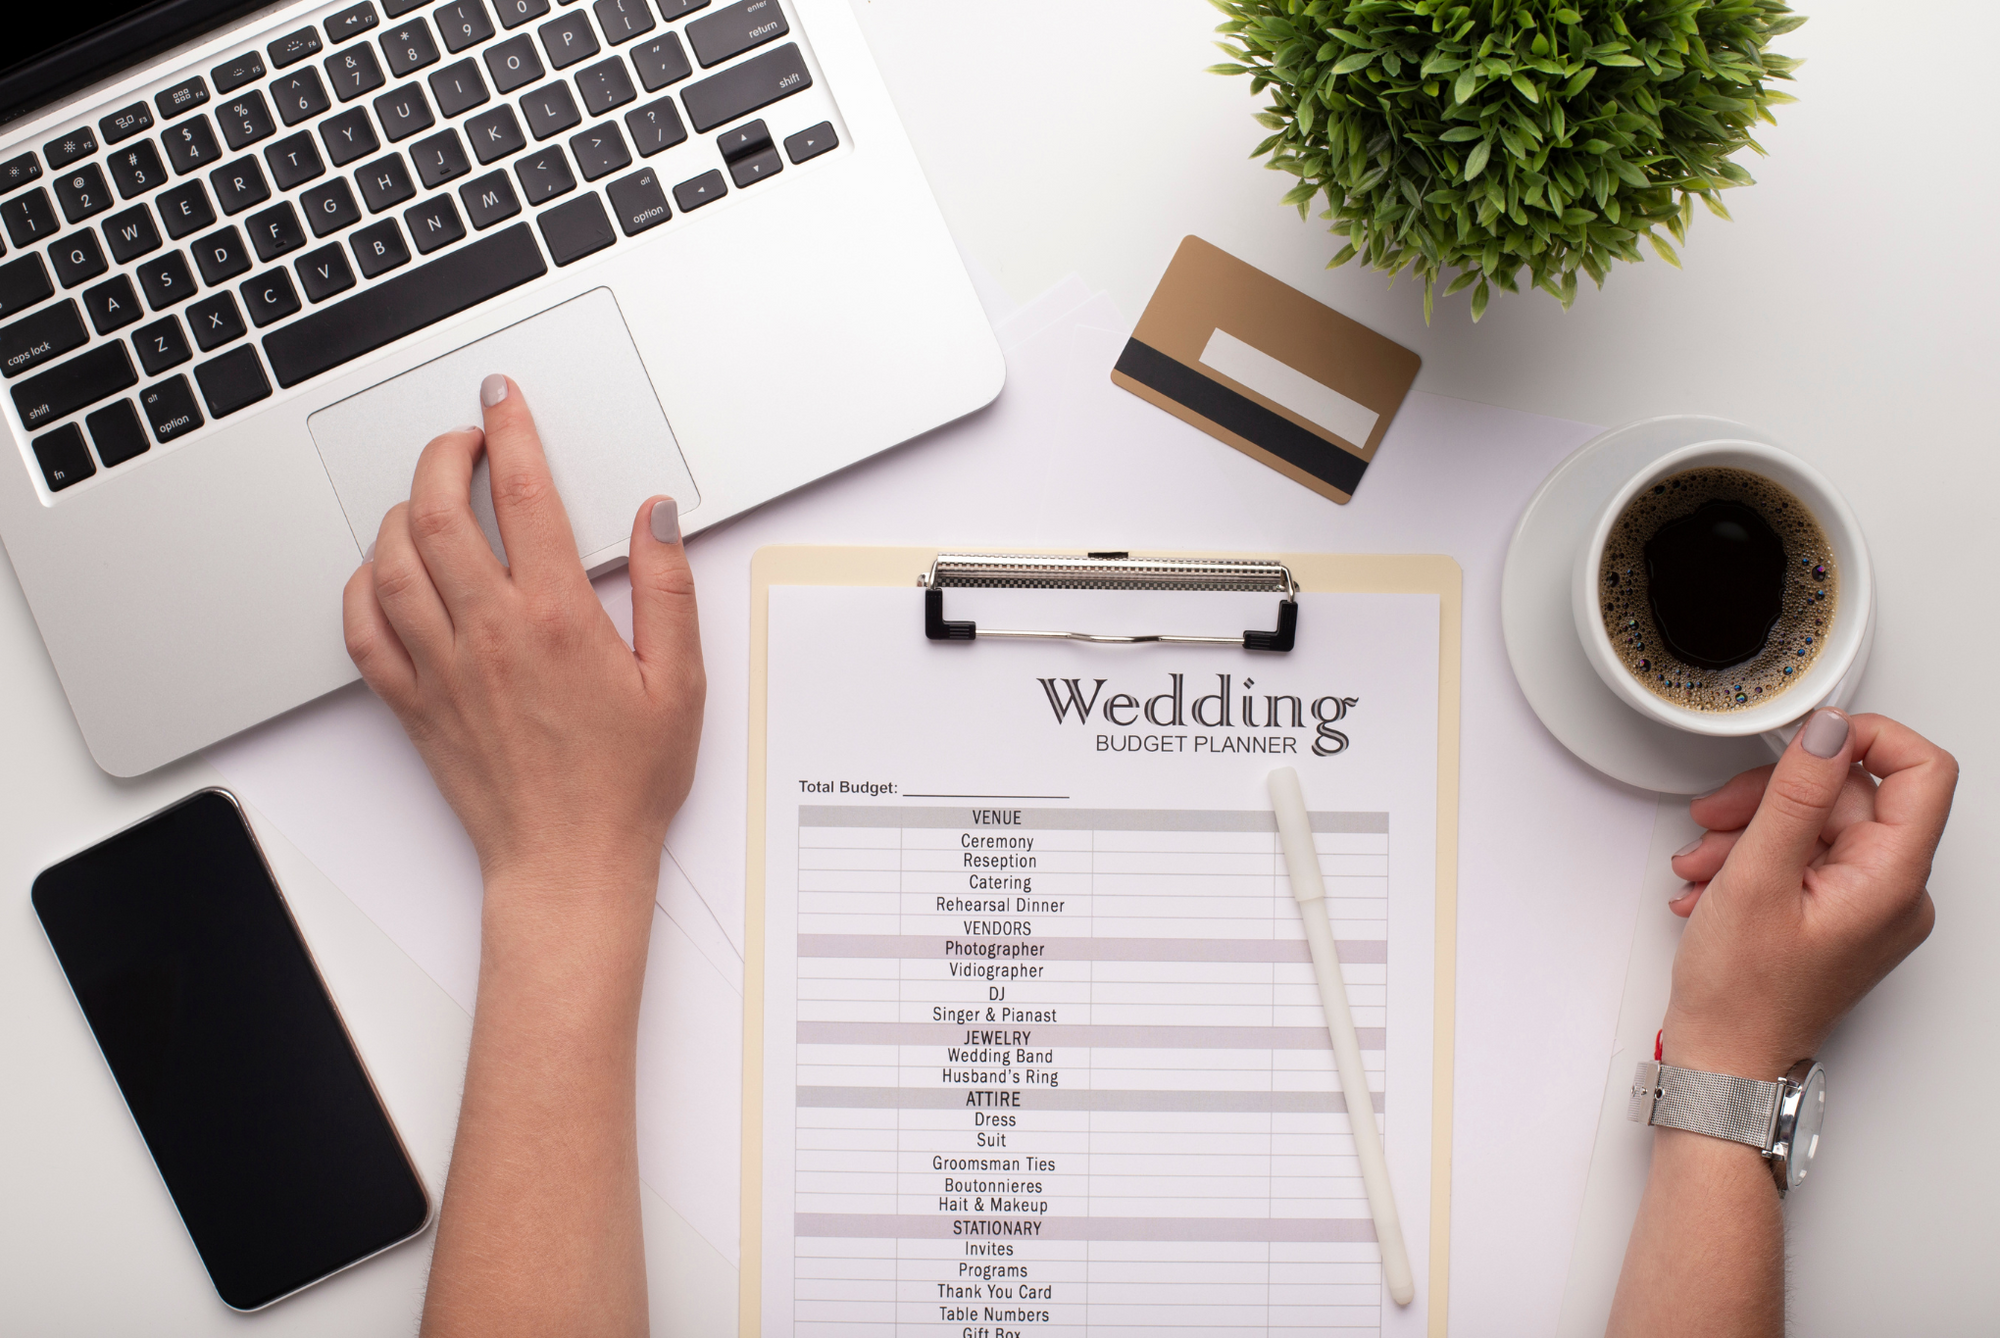 Our 5 Top Wedding Planning Tips